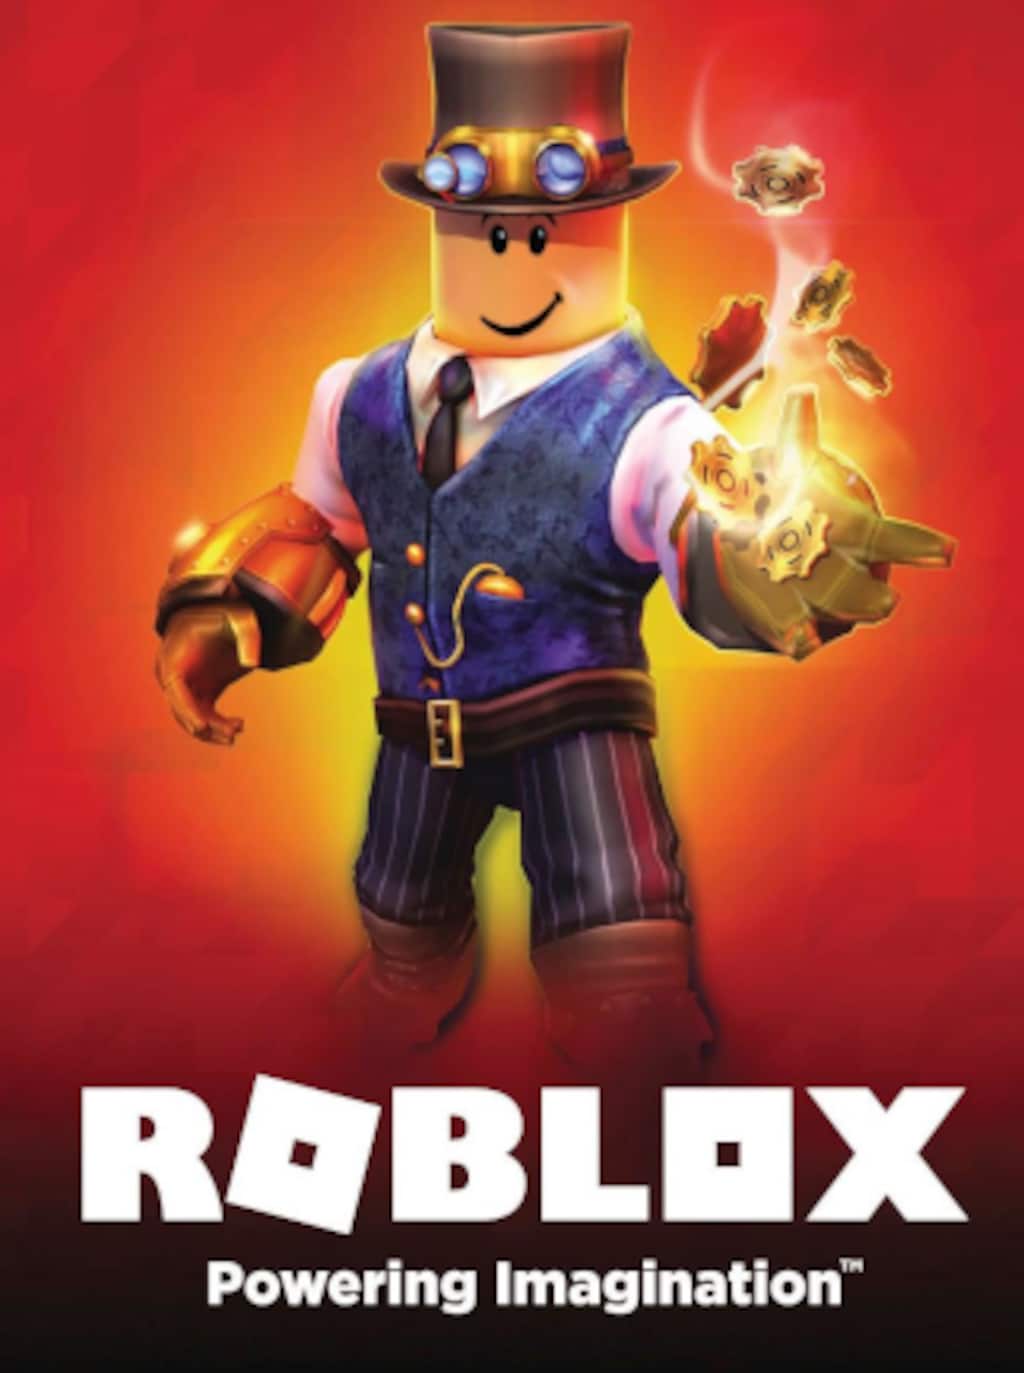 How to Redeem Roblox Gift Card; Where to Buy it - EZ PIN - Gift